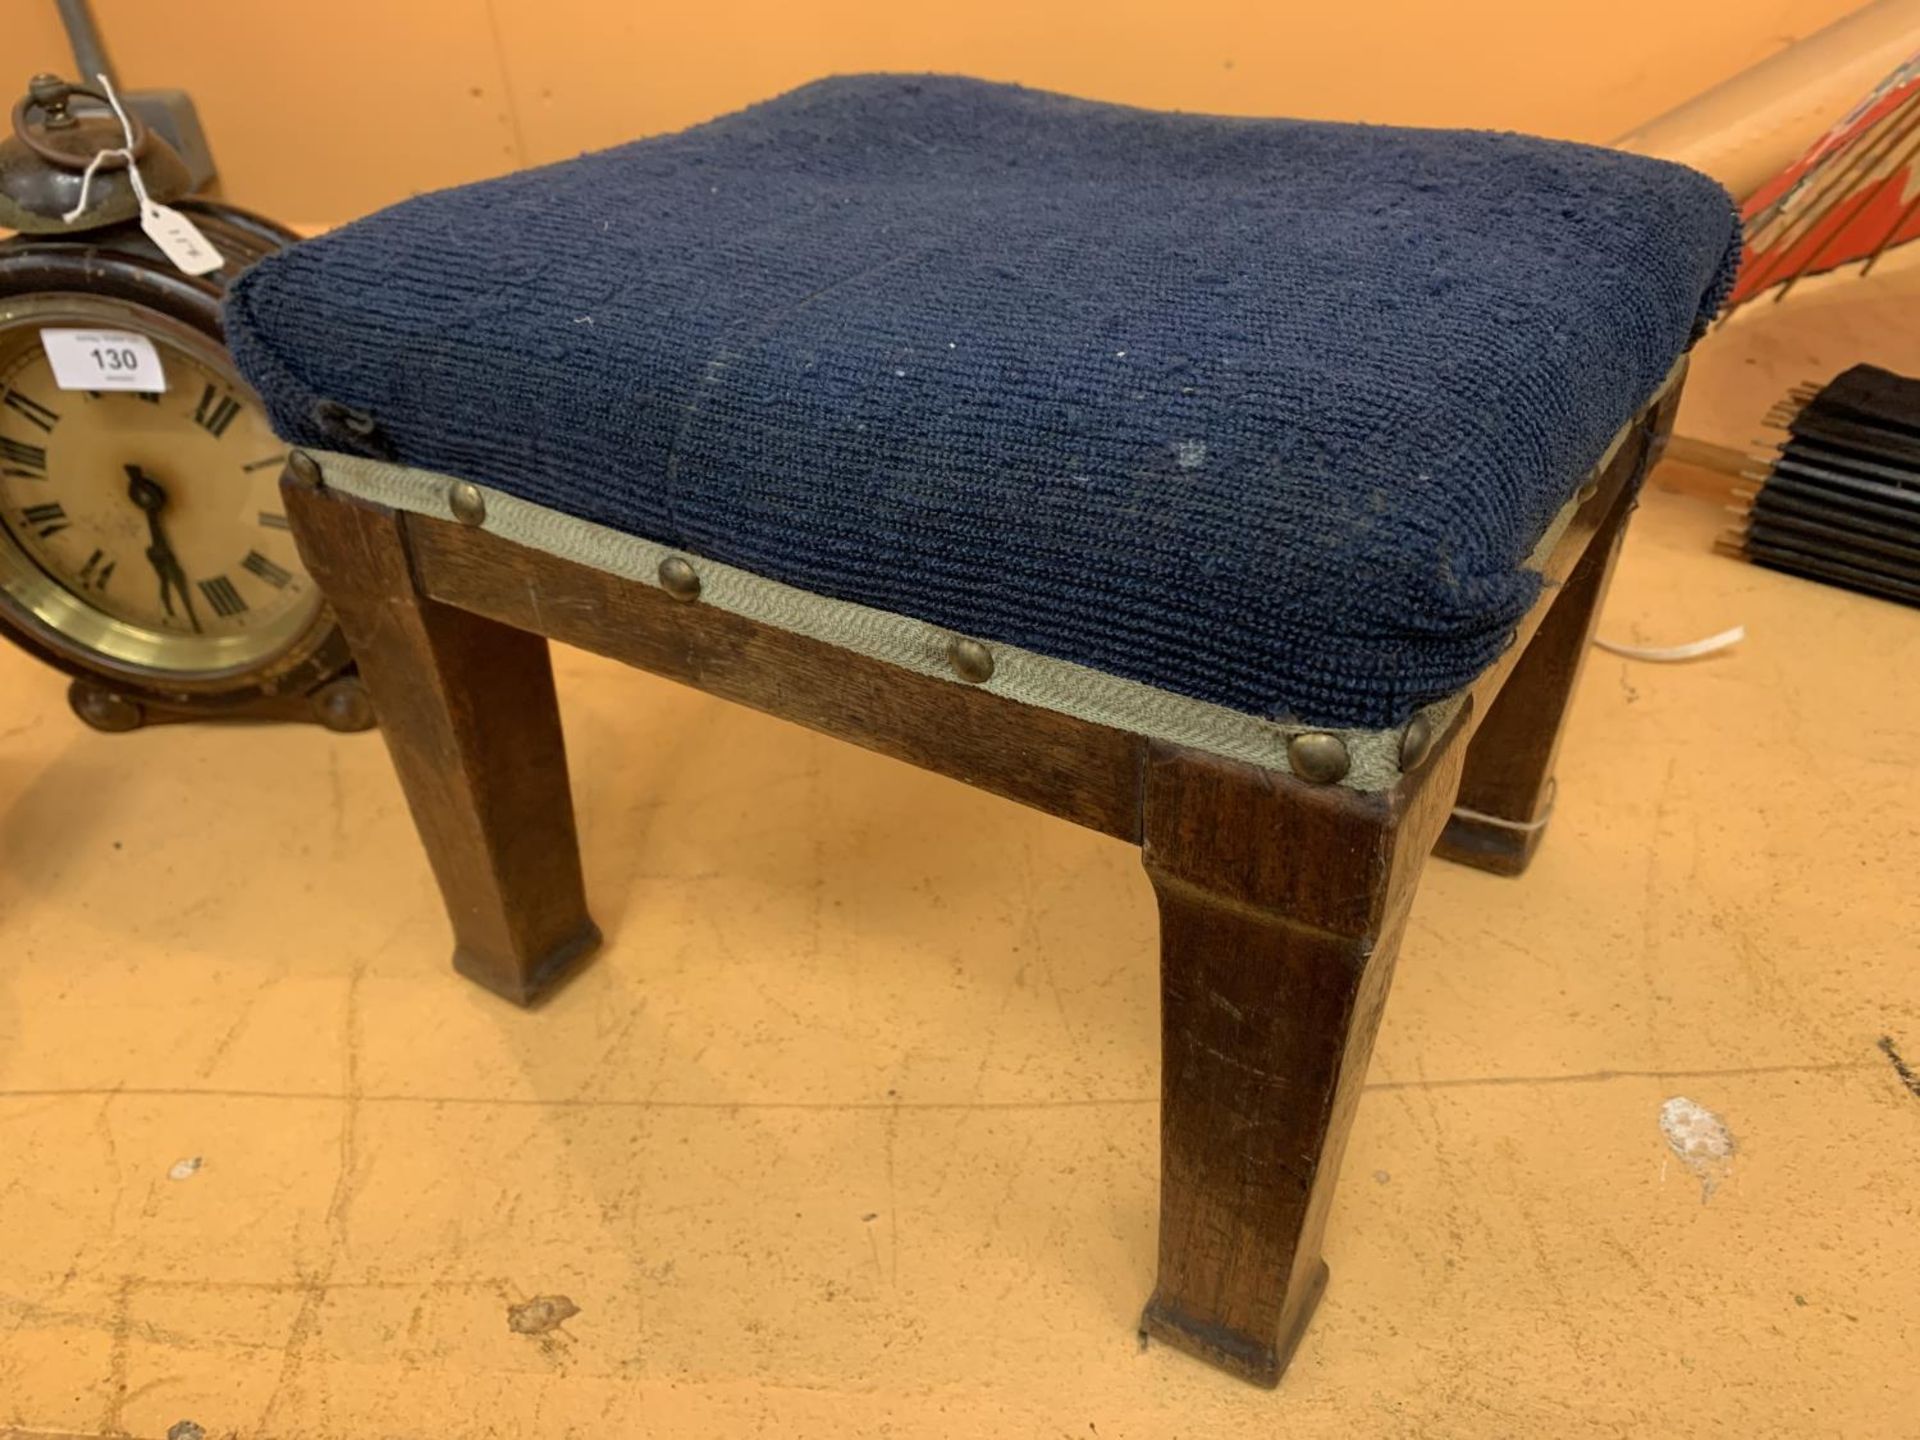 A SMALL FOUR LEGGED BLUE UPHOLSTERED FOOTSTOOL